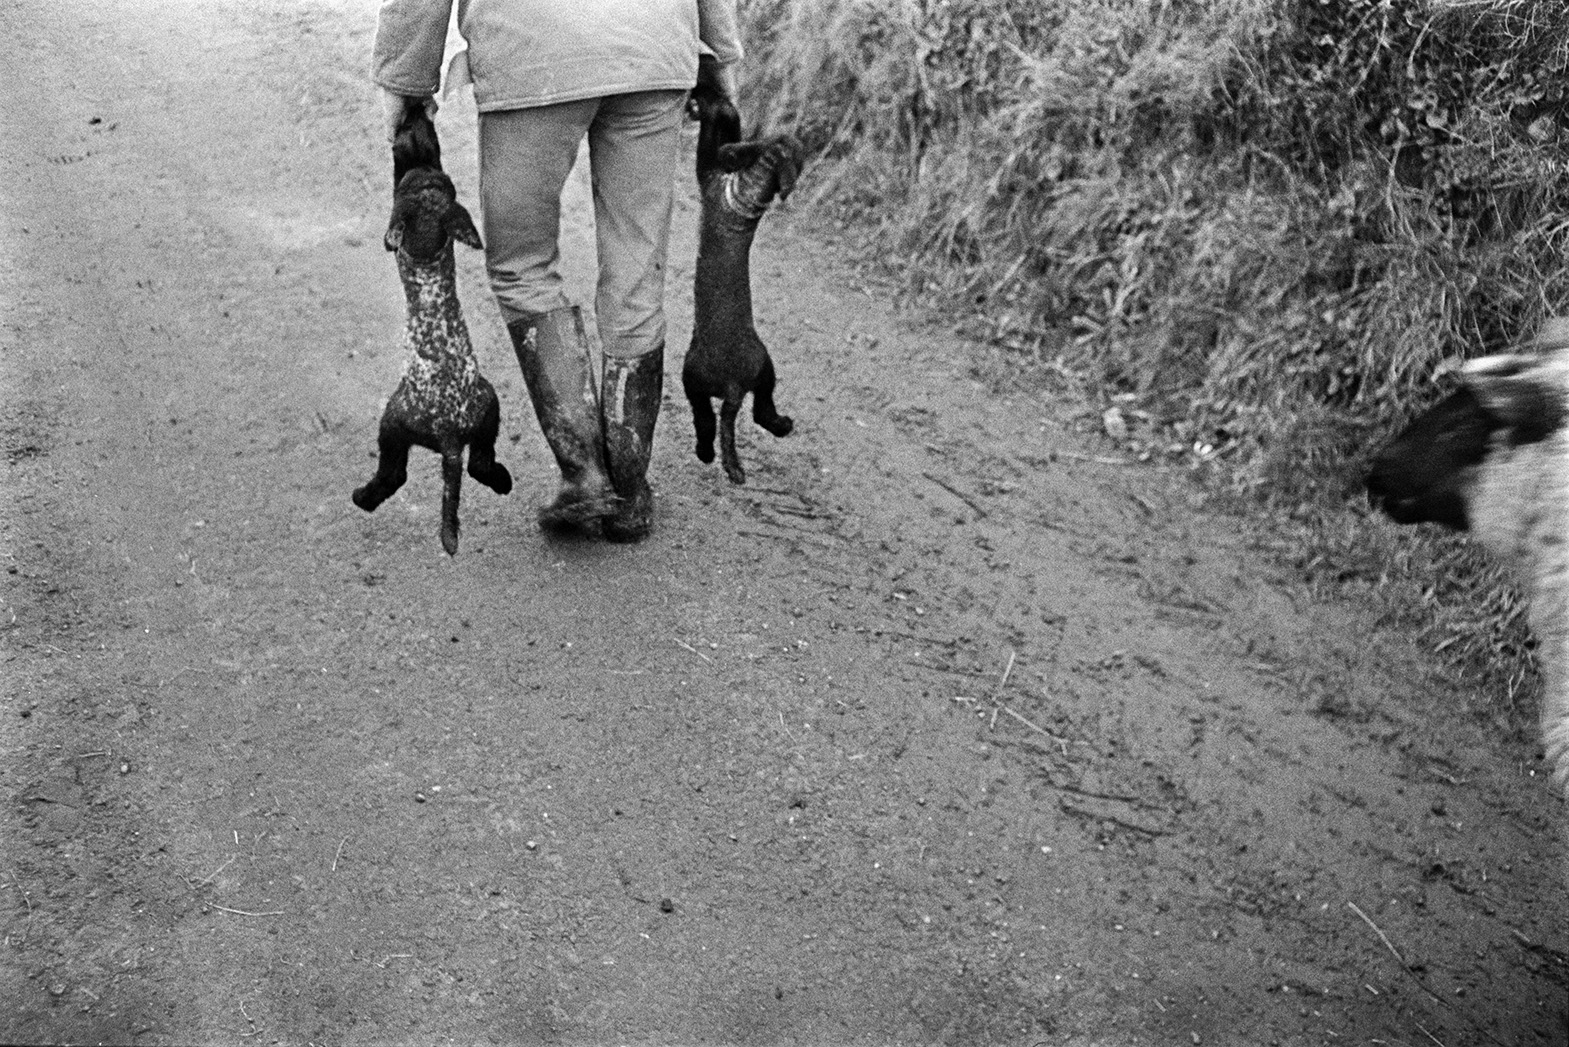 Ivor Bourne carrying two new born lambs along a lane in Beaford. A ewe is following him.